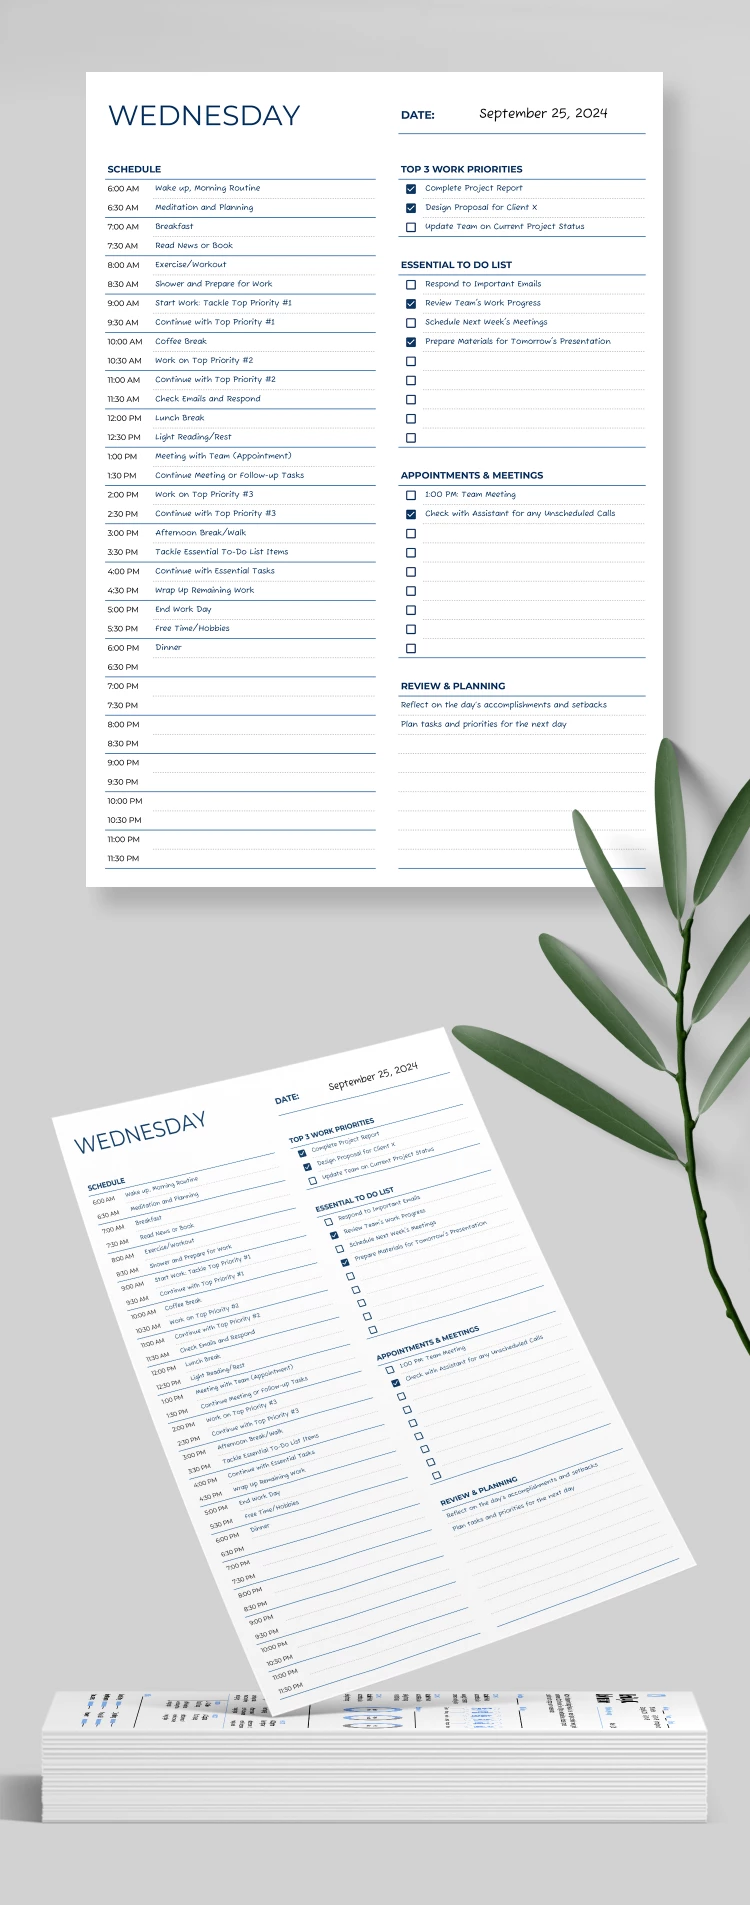 Simple Daily Schedule - free Google Docs Template - 10068748